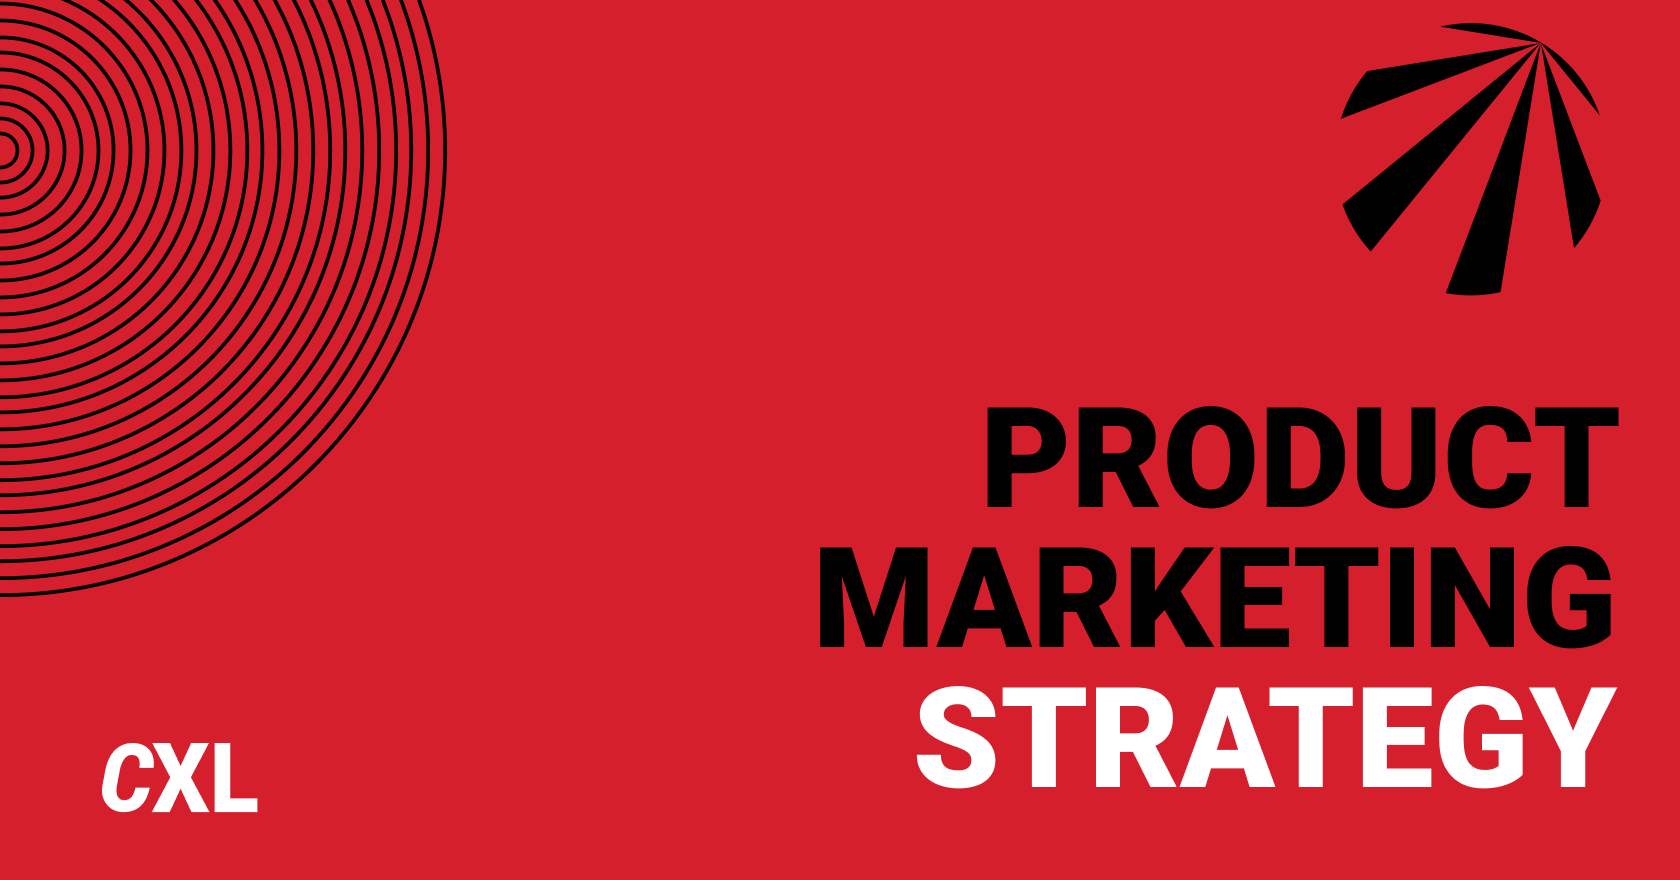 Product Marketing Strategy: Here's What You Need to Succeed - CXL